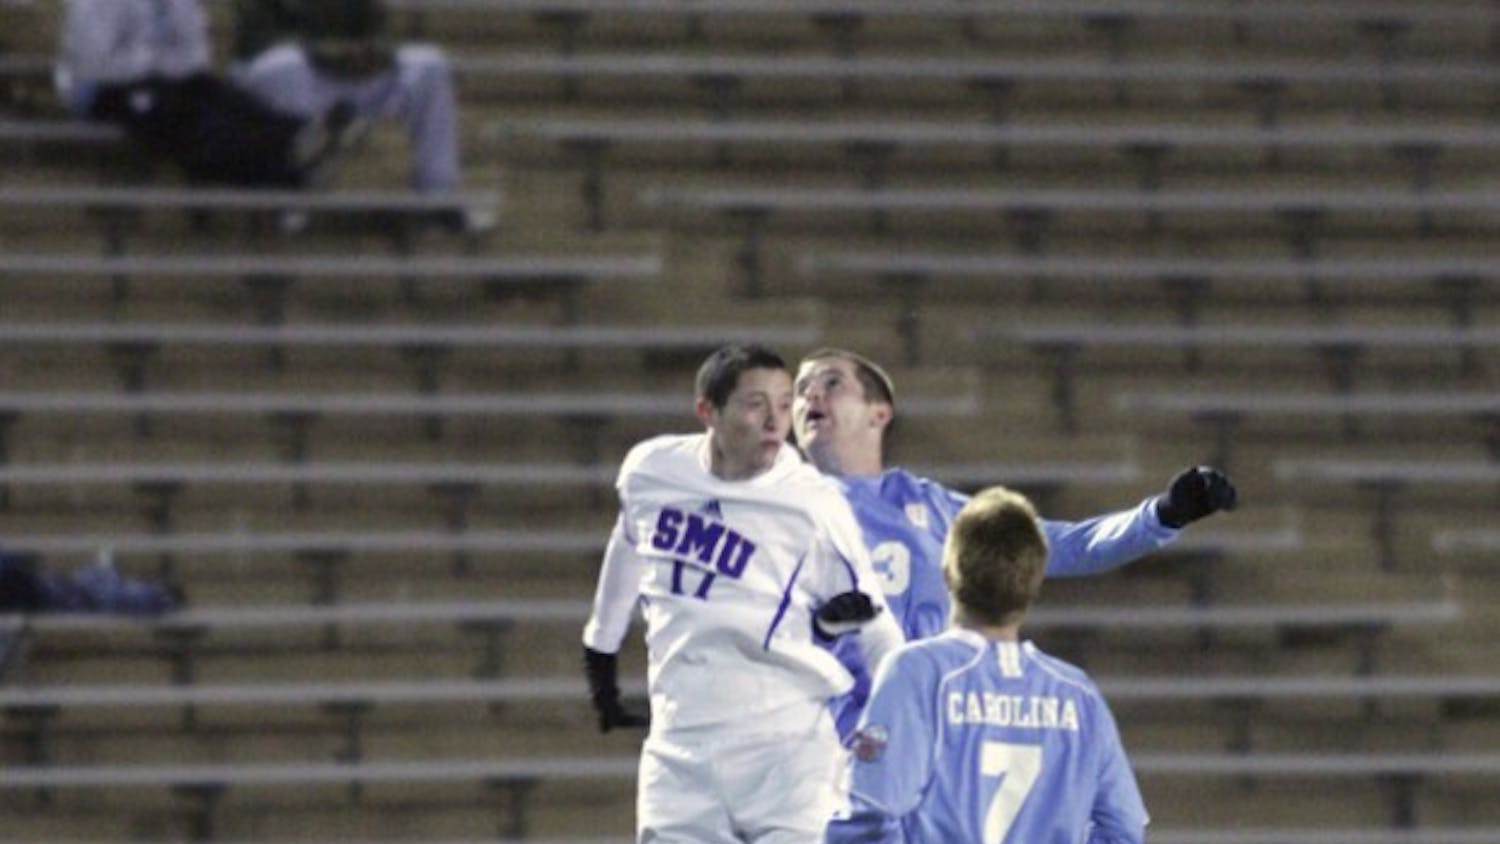 SMU’s Robbie Derschang goes for a header against Drew McKinney. Derschang was subject to a rowdy UNC crowd throughout the game.